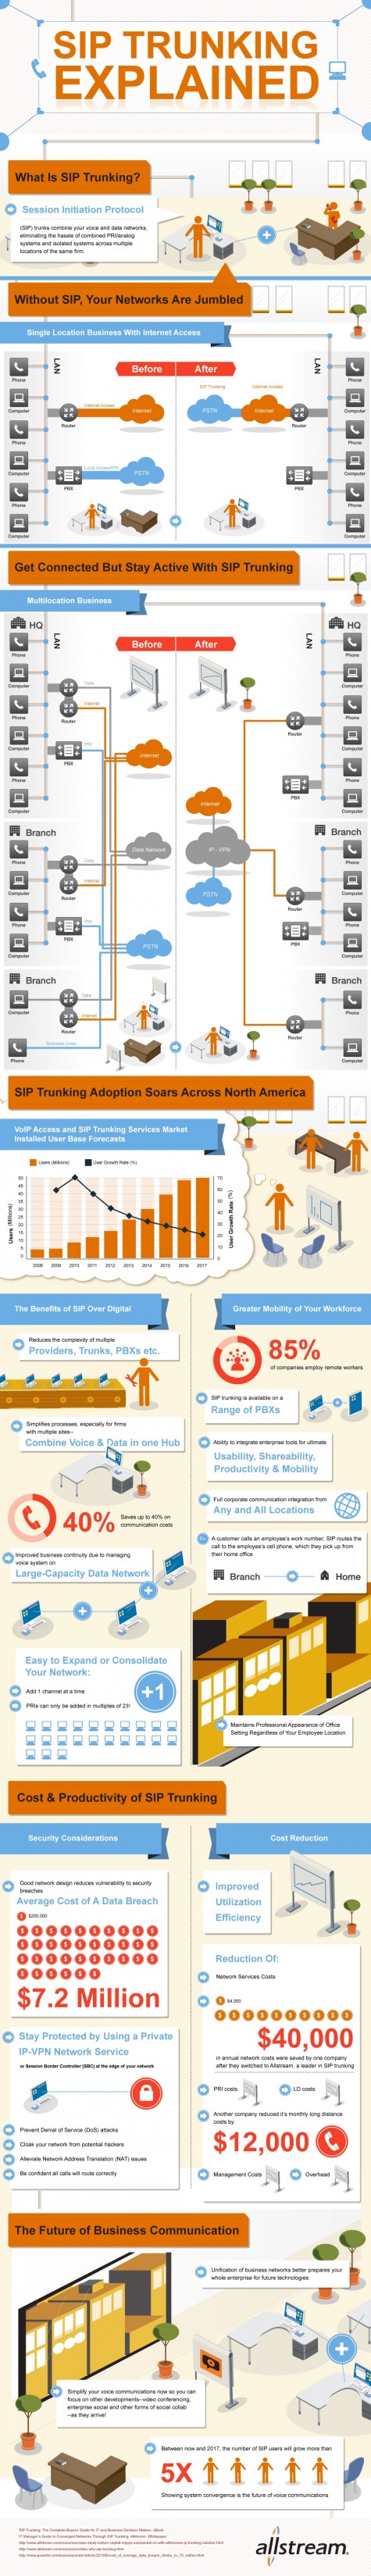 SIP alllstream1 e13377812141672 - Secure, Reliable Connectivity Drives SIP Trunking Adoption (Infographic)